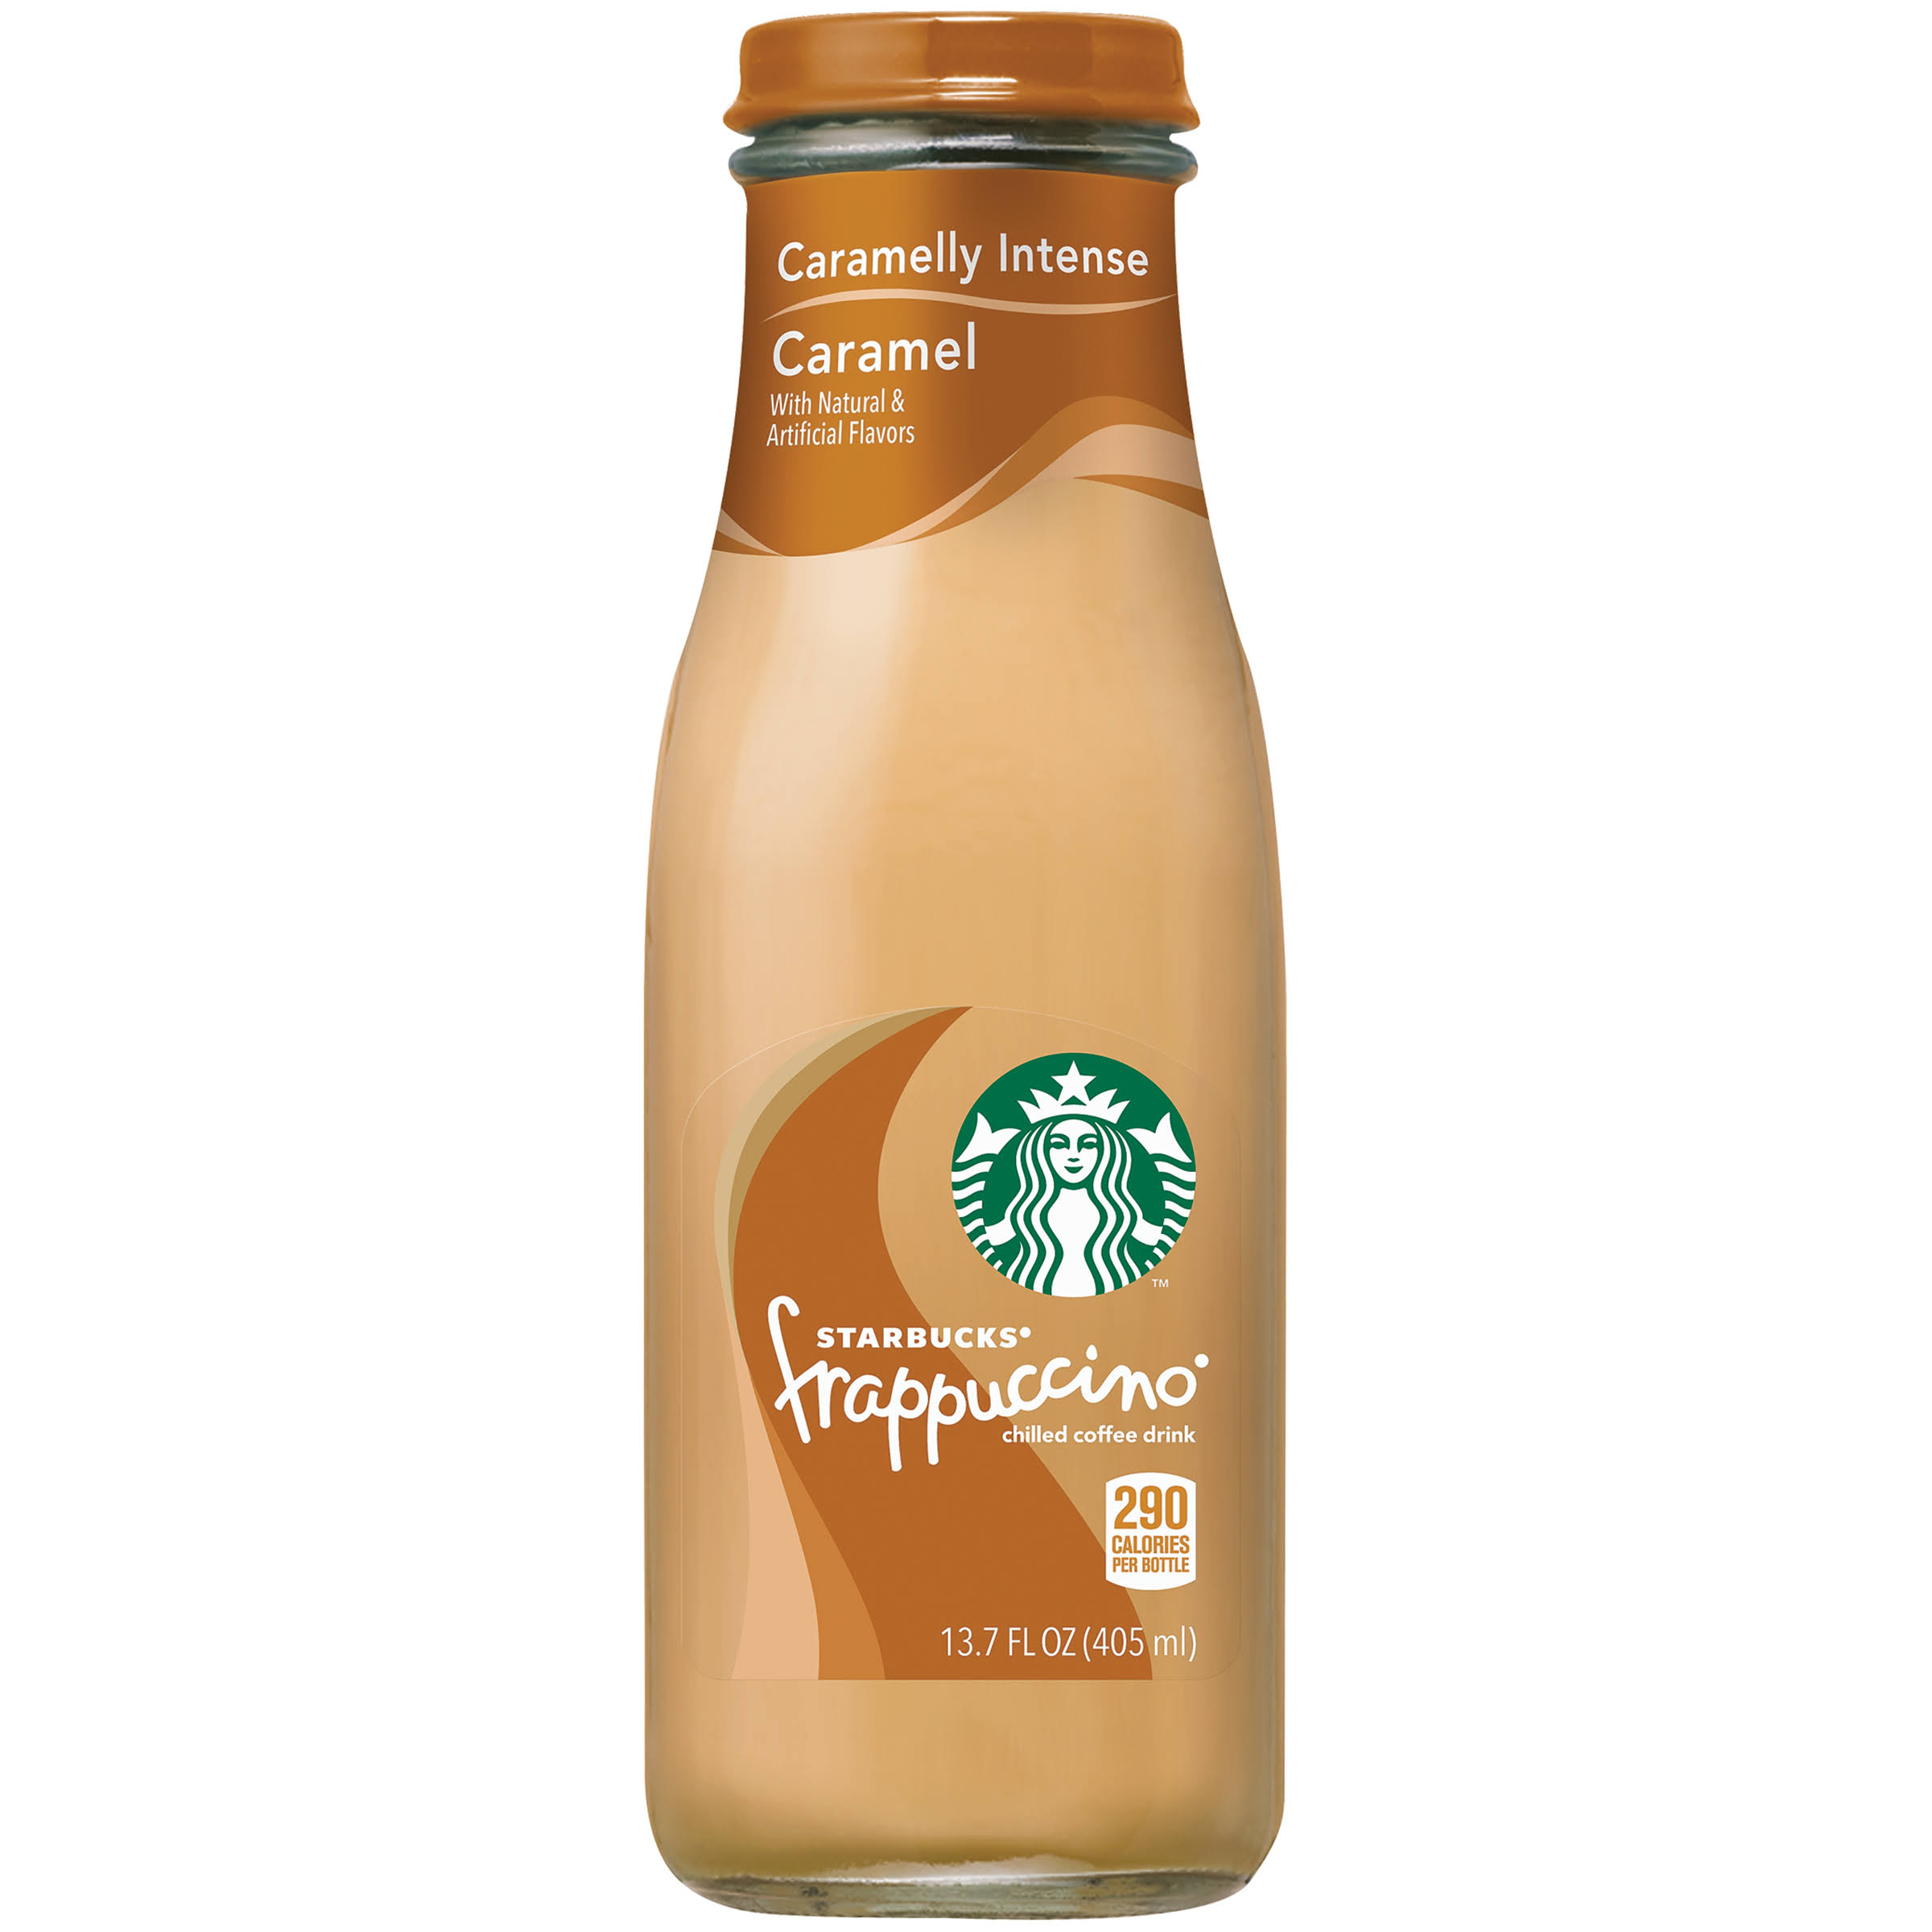 Starbucks Frappuccino Chilled Coffee Drink - Caramel, 13.7oz